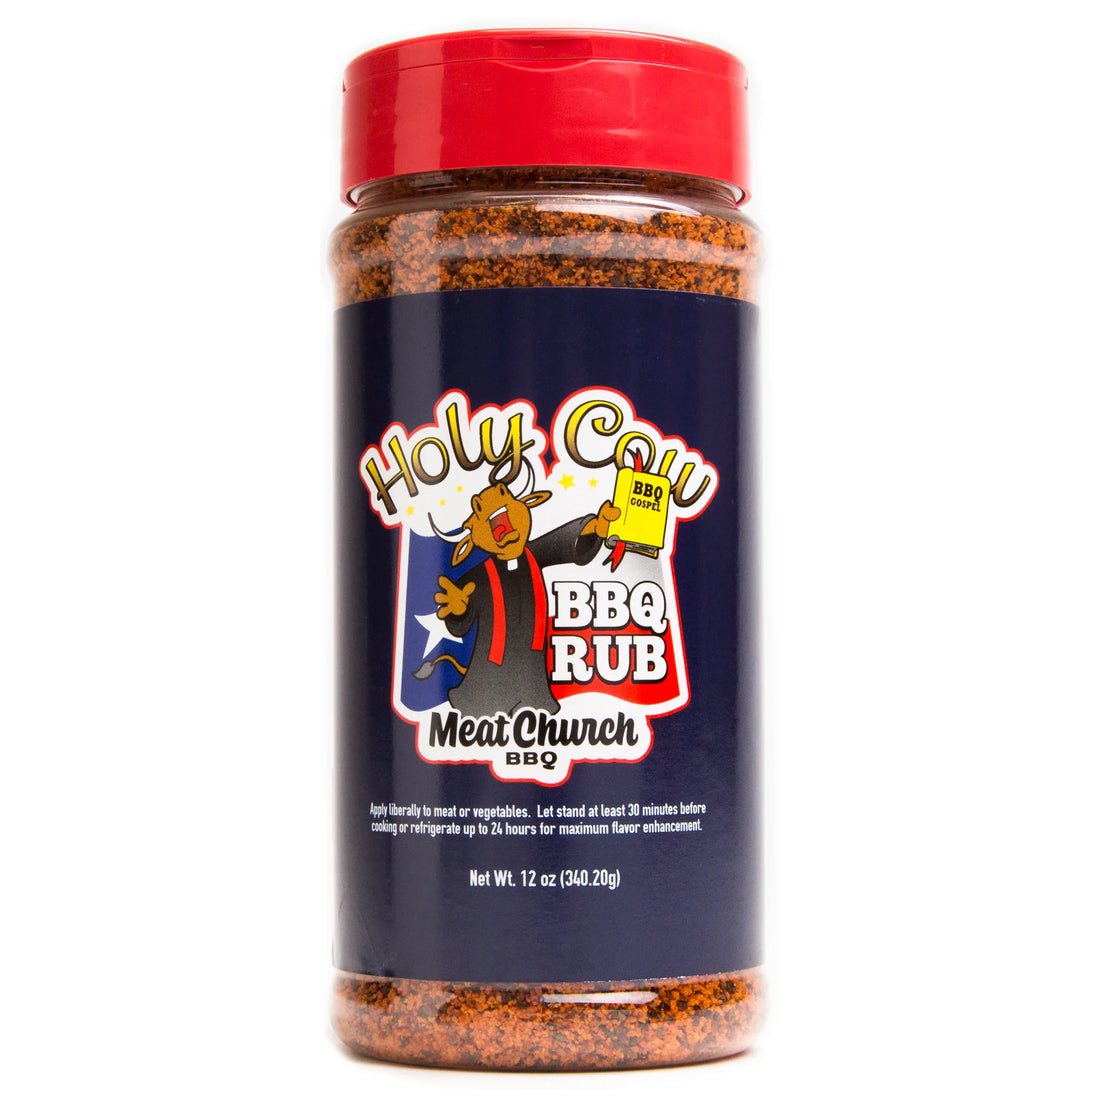 The Holy Cow BBQ Rub by Meat Church